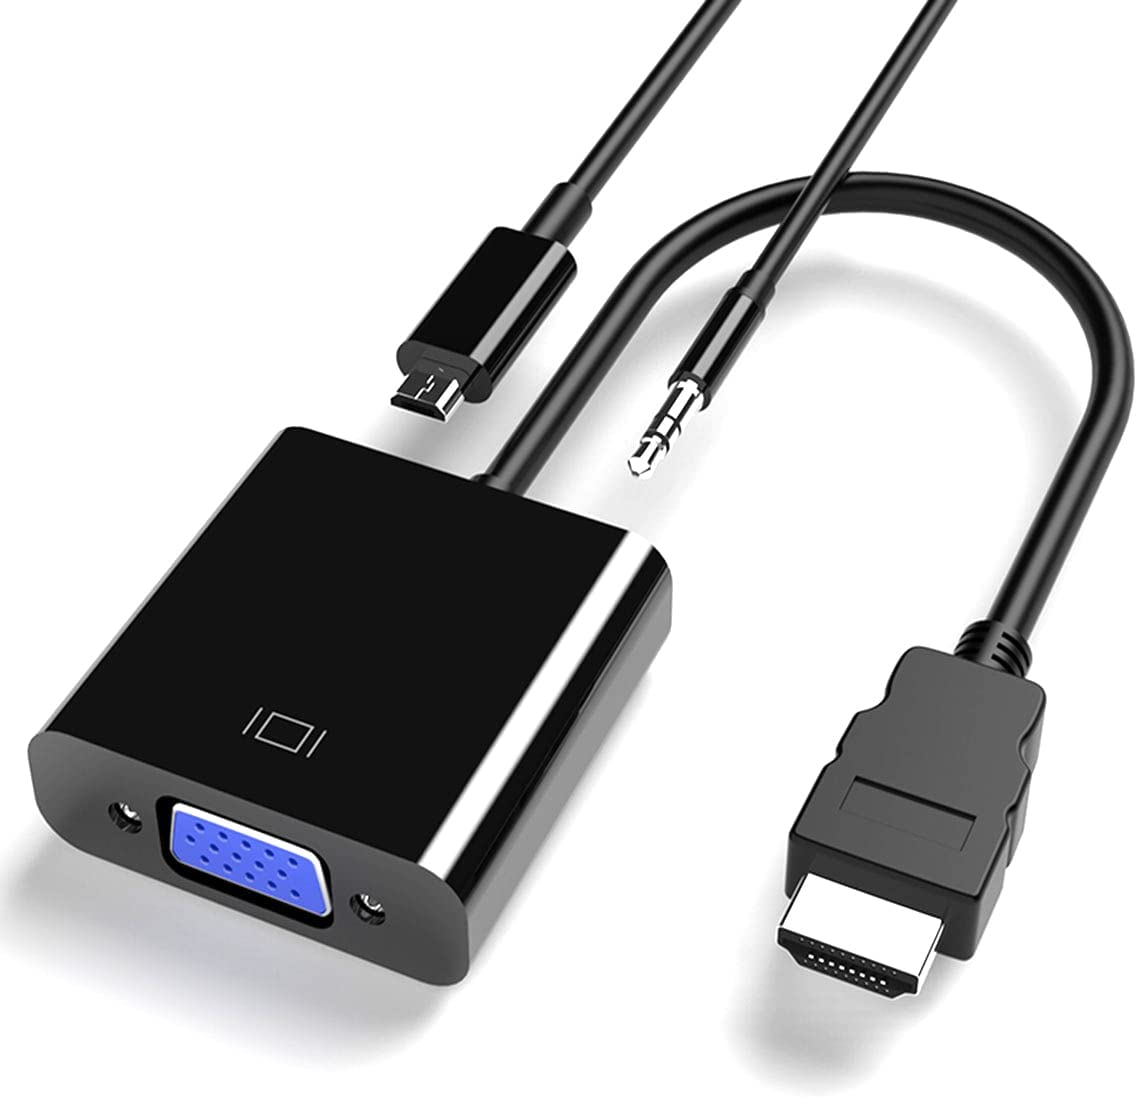 HDMI to Adapter, Cuxnoo HDMI-VGA 1080P Converter with 3.5mm Audio Jack and USB Supply for HDMI Laptop, PC, PS4, Blue Ray Raspberry Pi, Xbox to VGA Monitor, Projector and